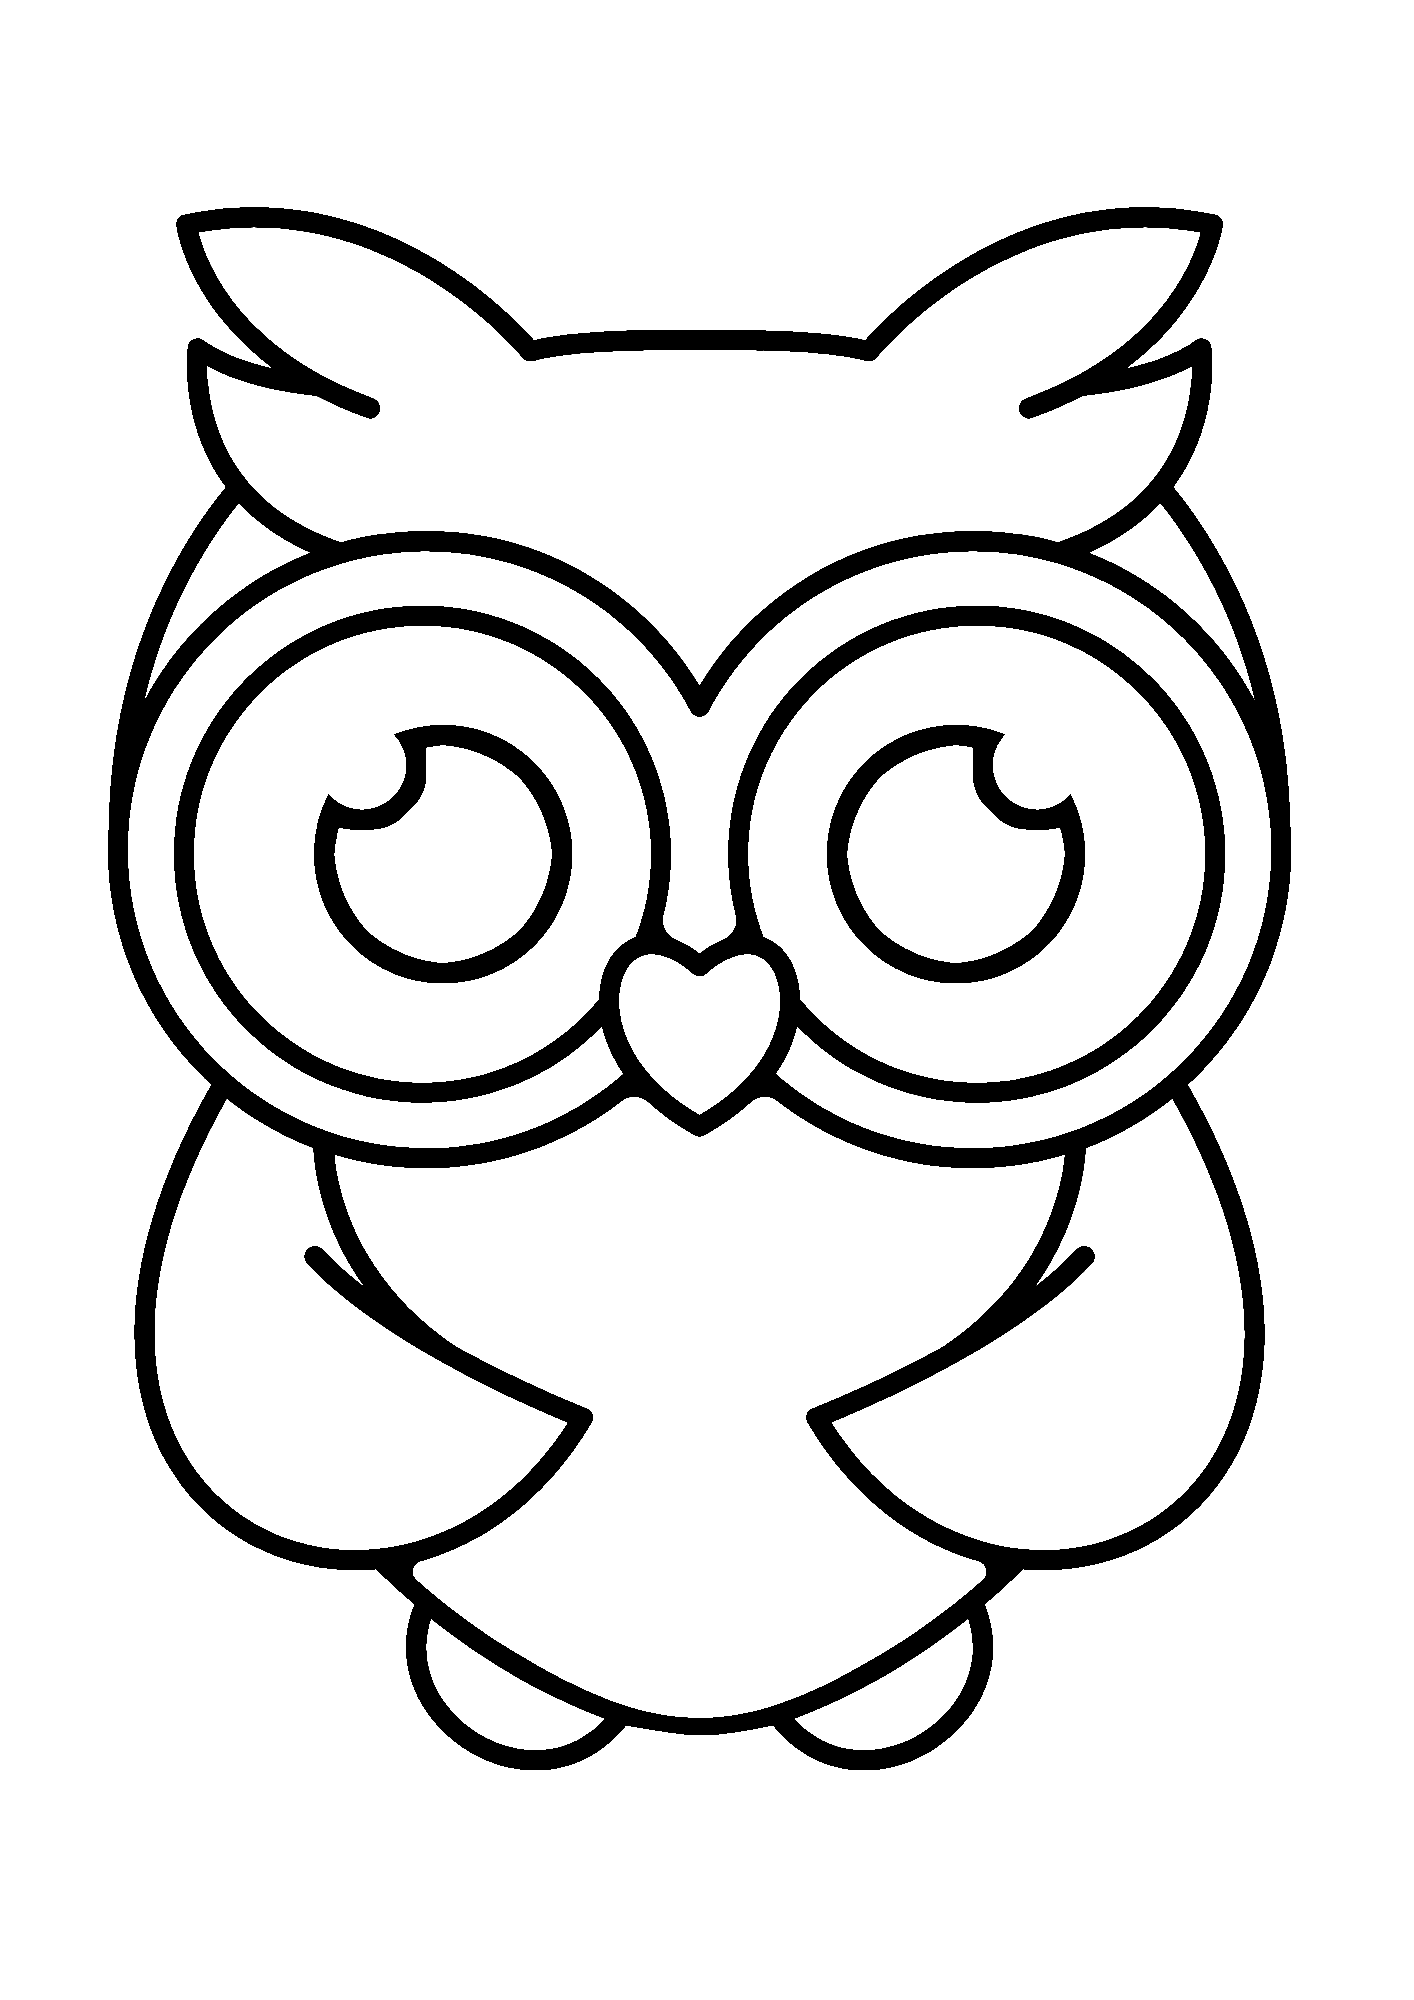 Free Printable Owl Coloring Pages